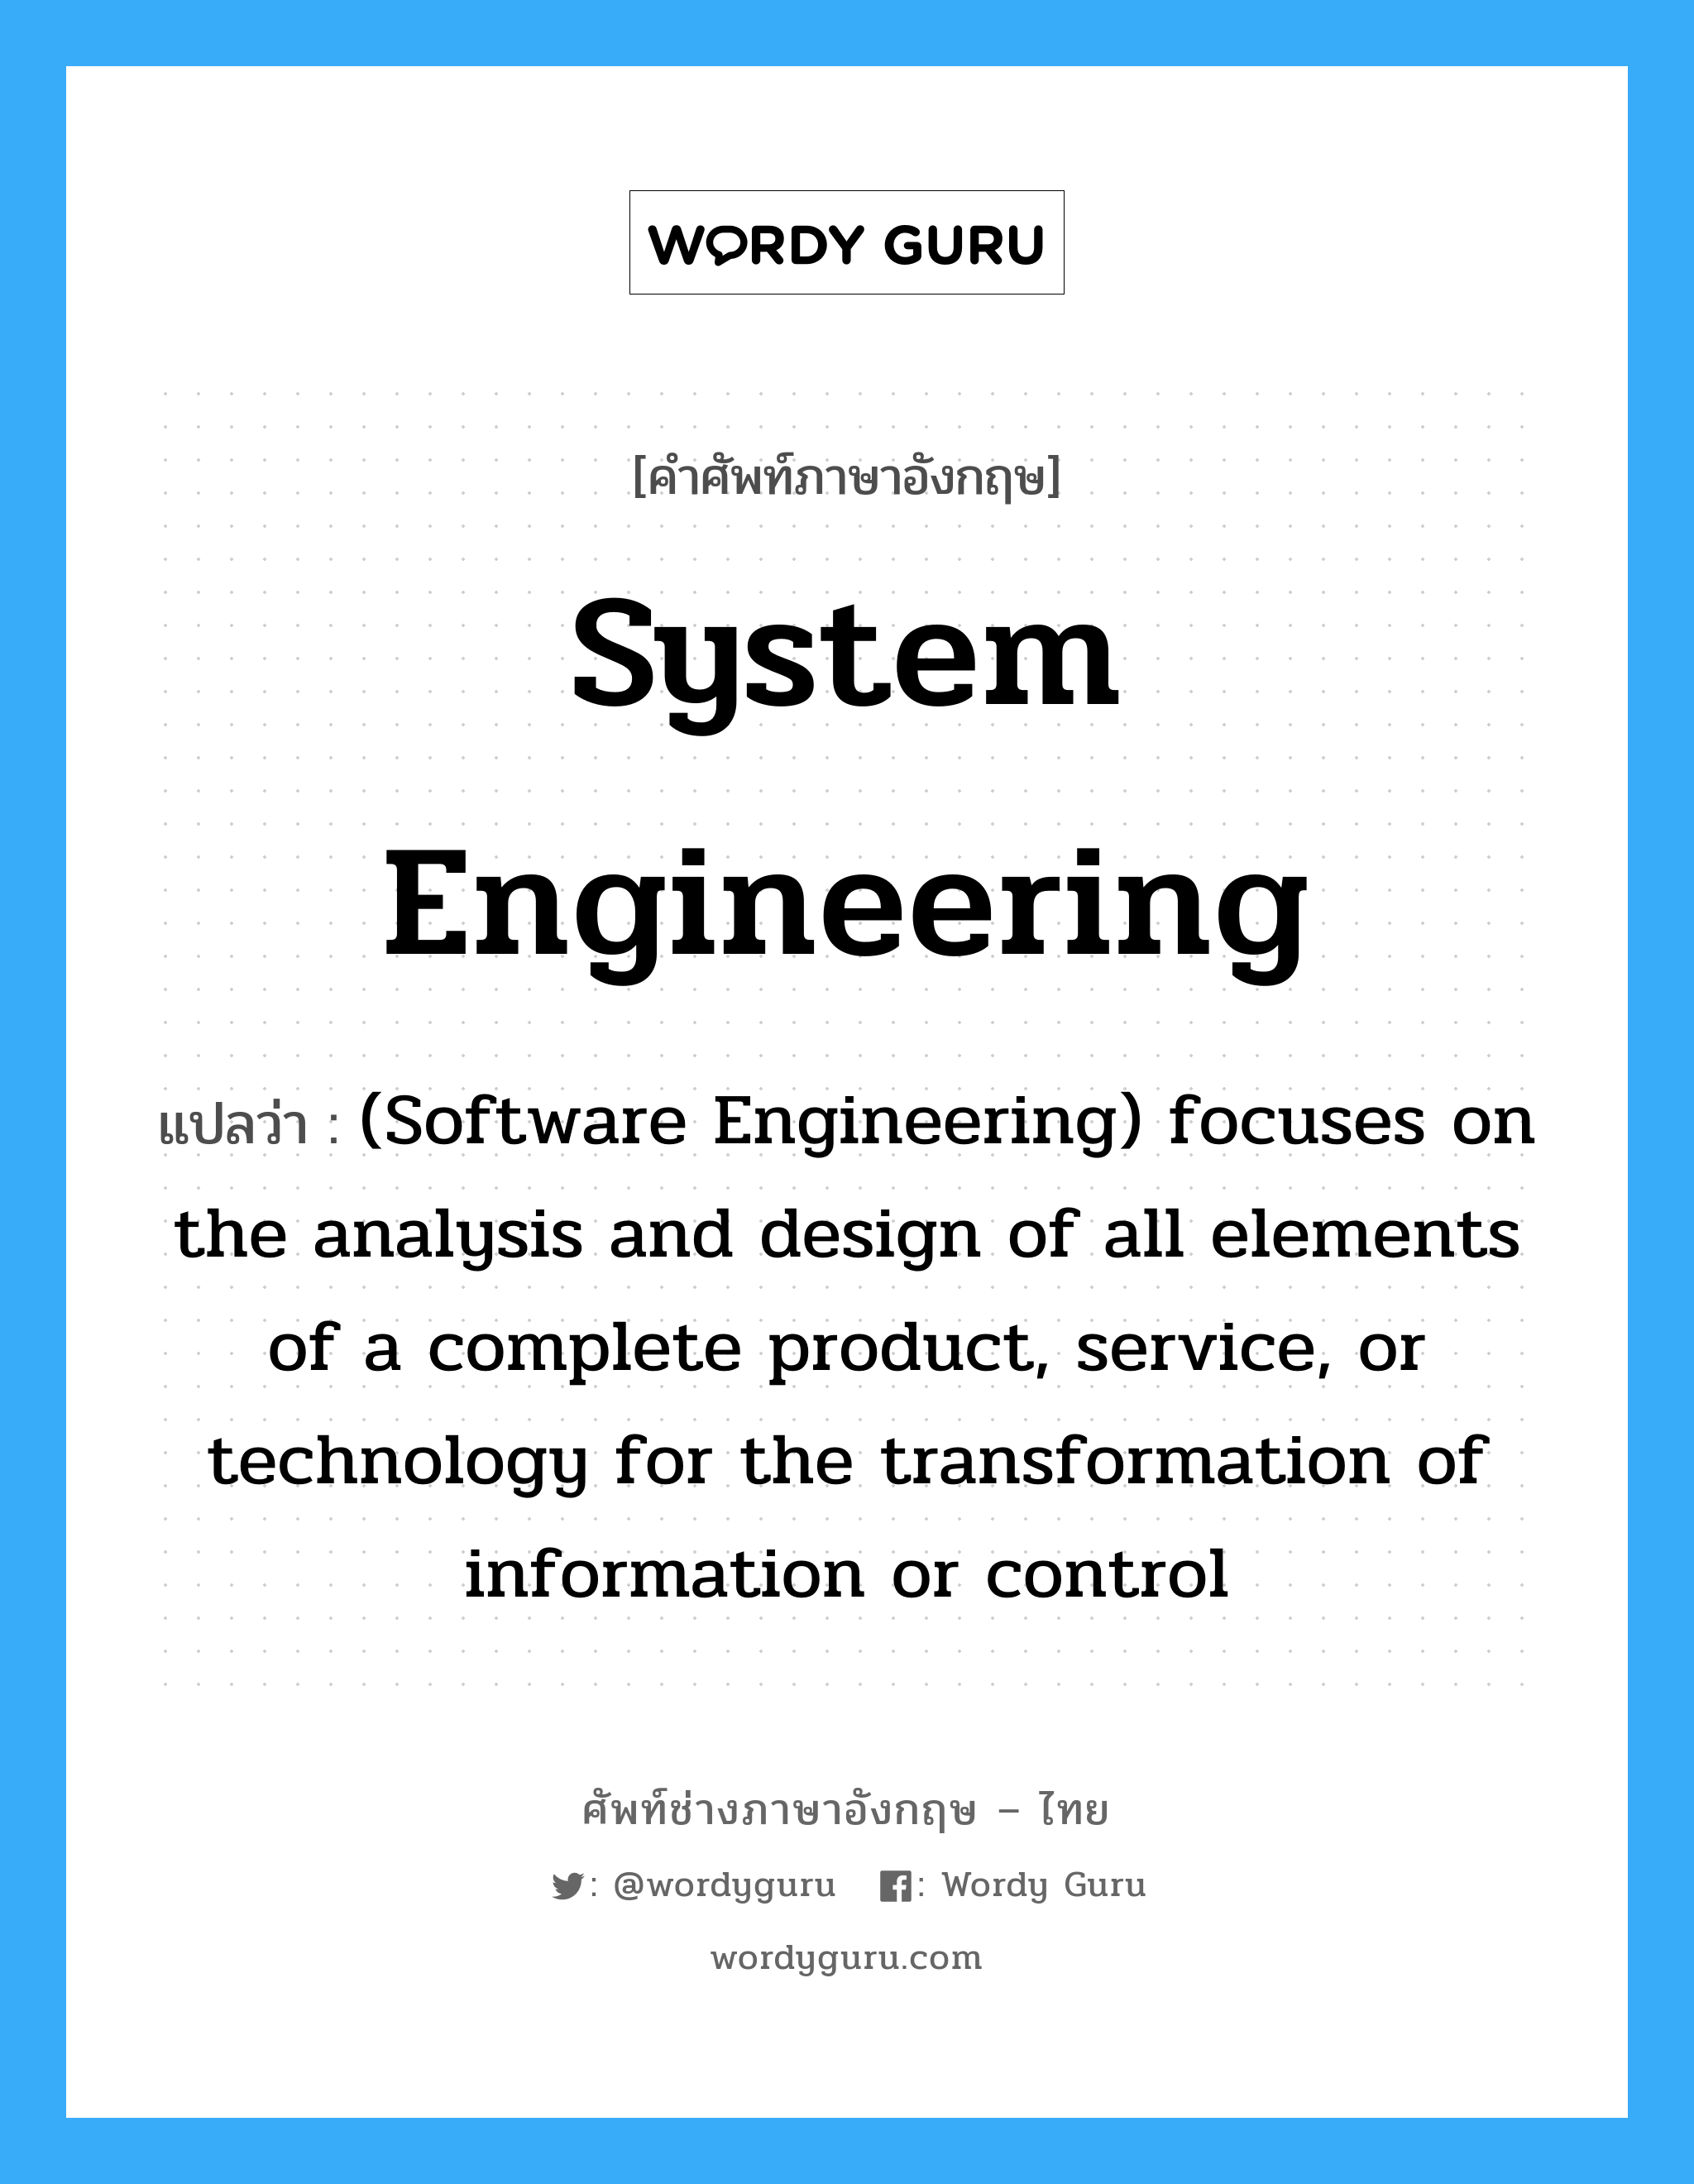 (Software Engineering) focuses on the analysis and design of all elements of a complete product, service, or technology for the transformation of information or control ภาษาอังกฤษ?, คำศัพท์ช่างภาษาอังกฤษ - ไทย (Software Engineering) focuses on the analysis and design of all elements of a complete product, service, or technology for the transformation of information or control คำศัพท์ภาษาอังกฤษ (Software Engineering) focuses on the analysis and design of all elements of a complete product, service, or technology for the transformation of information or control แปลว่า System engineering